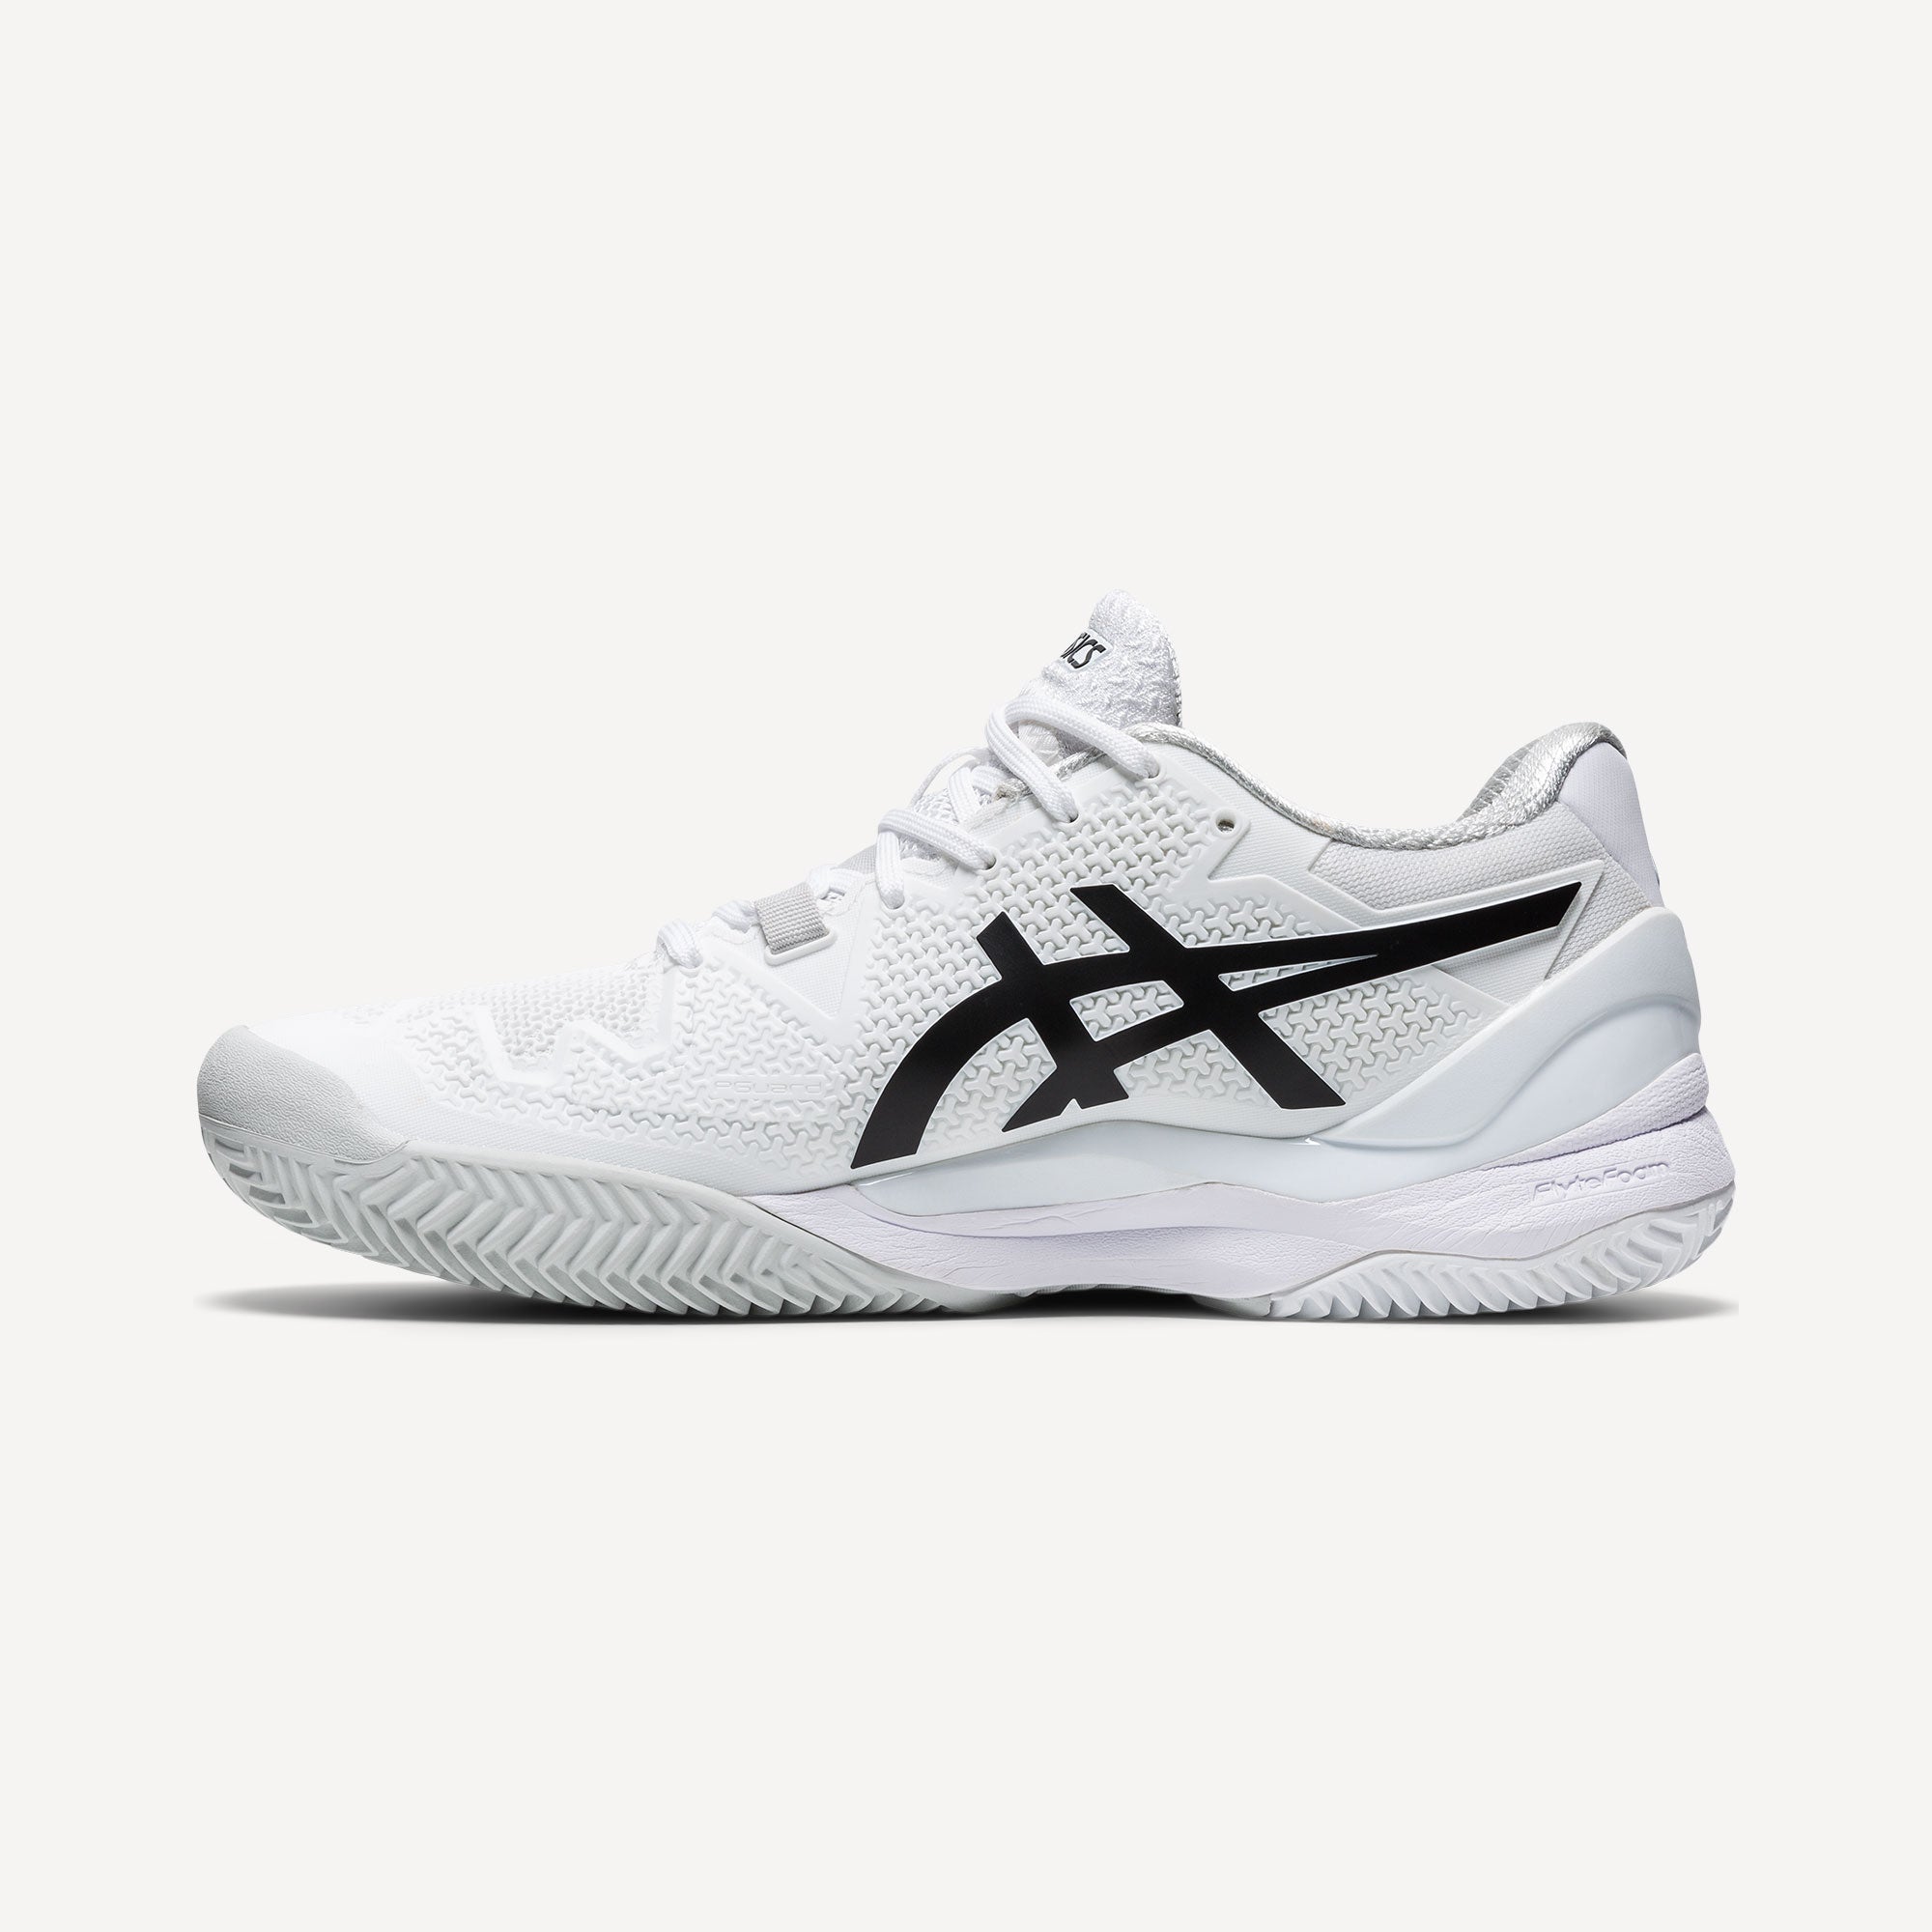 ASICS Gel-Resolution 8 Women's Clay Court Tennis Shoes White (3)